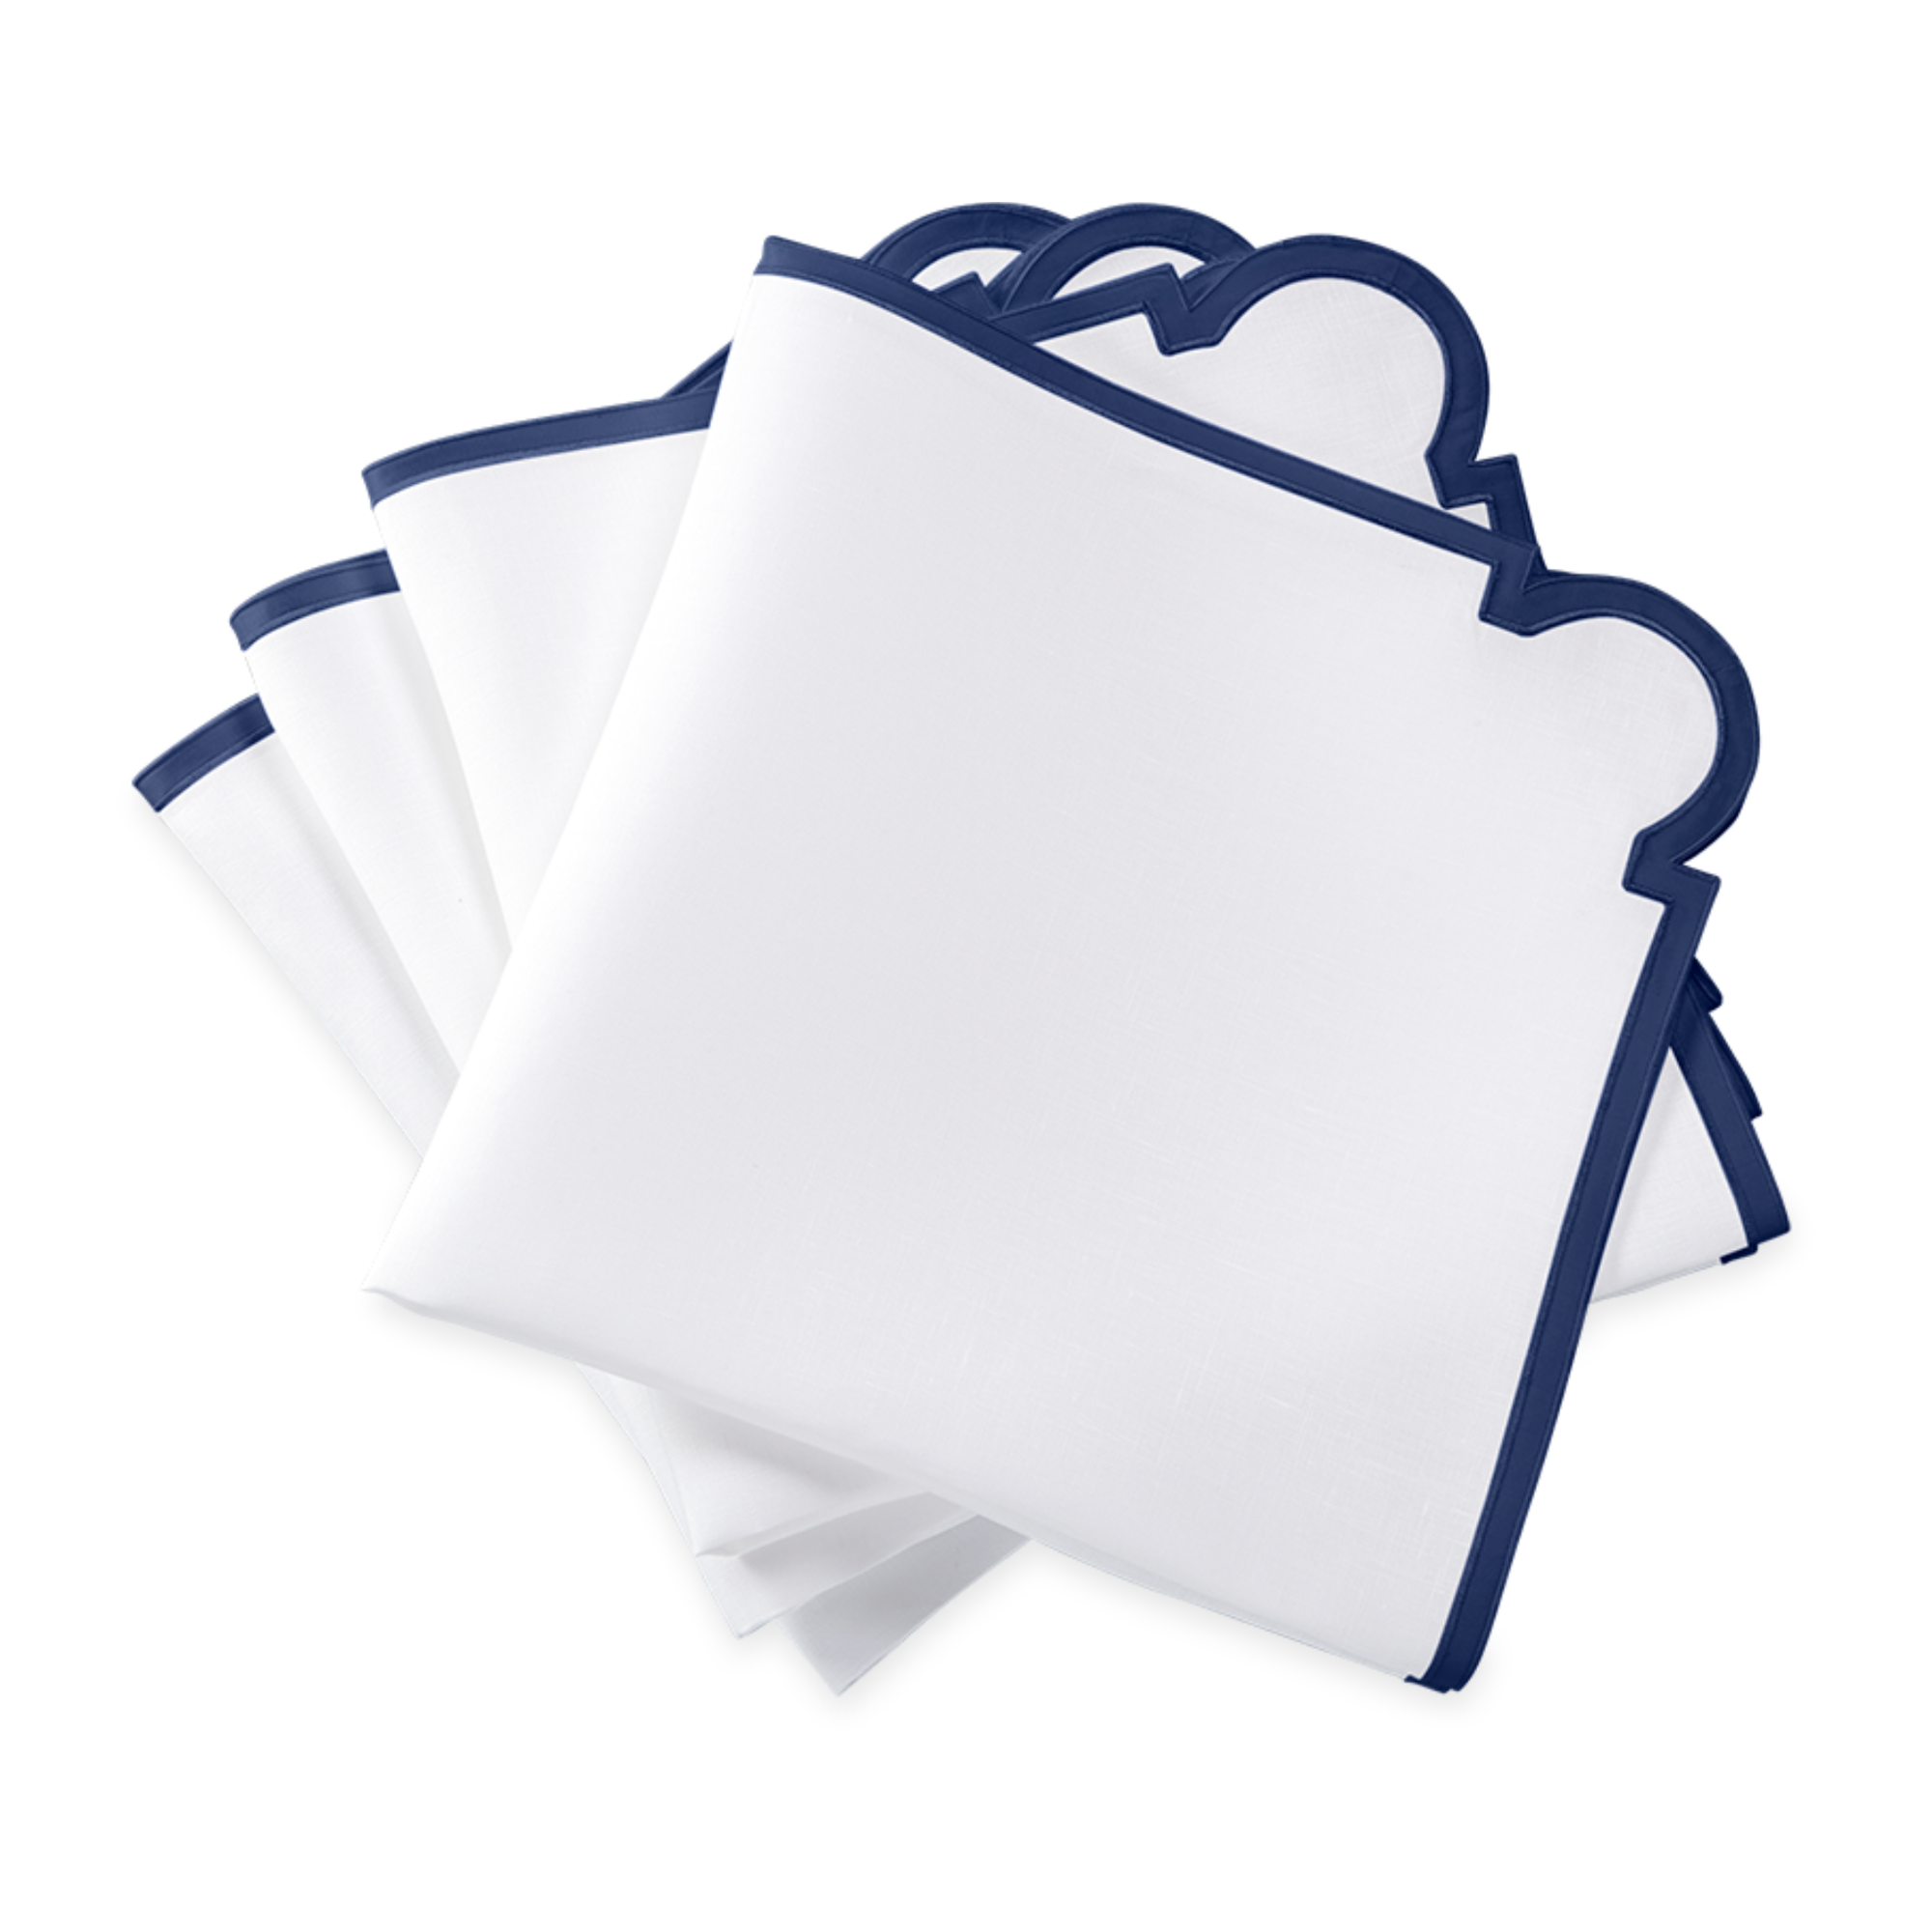 Stack of Matouk Mirasol Table Linen Napkins in Navy Color